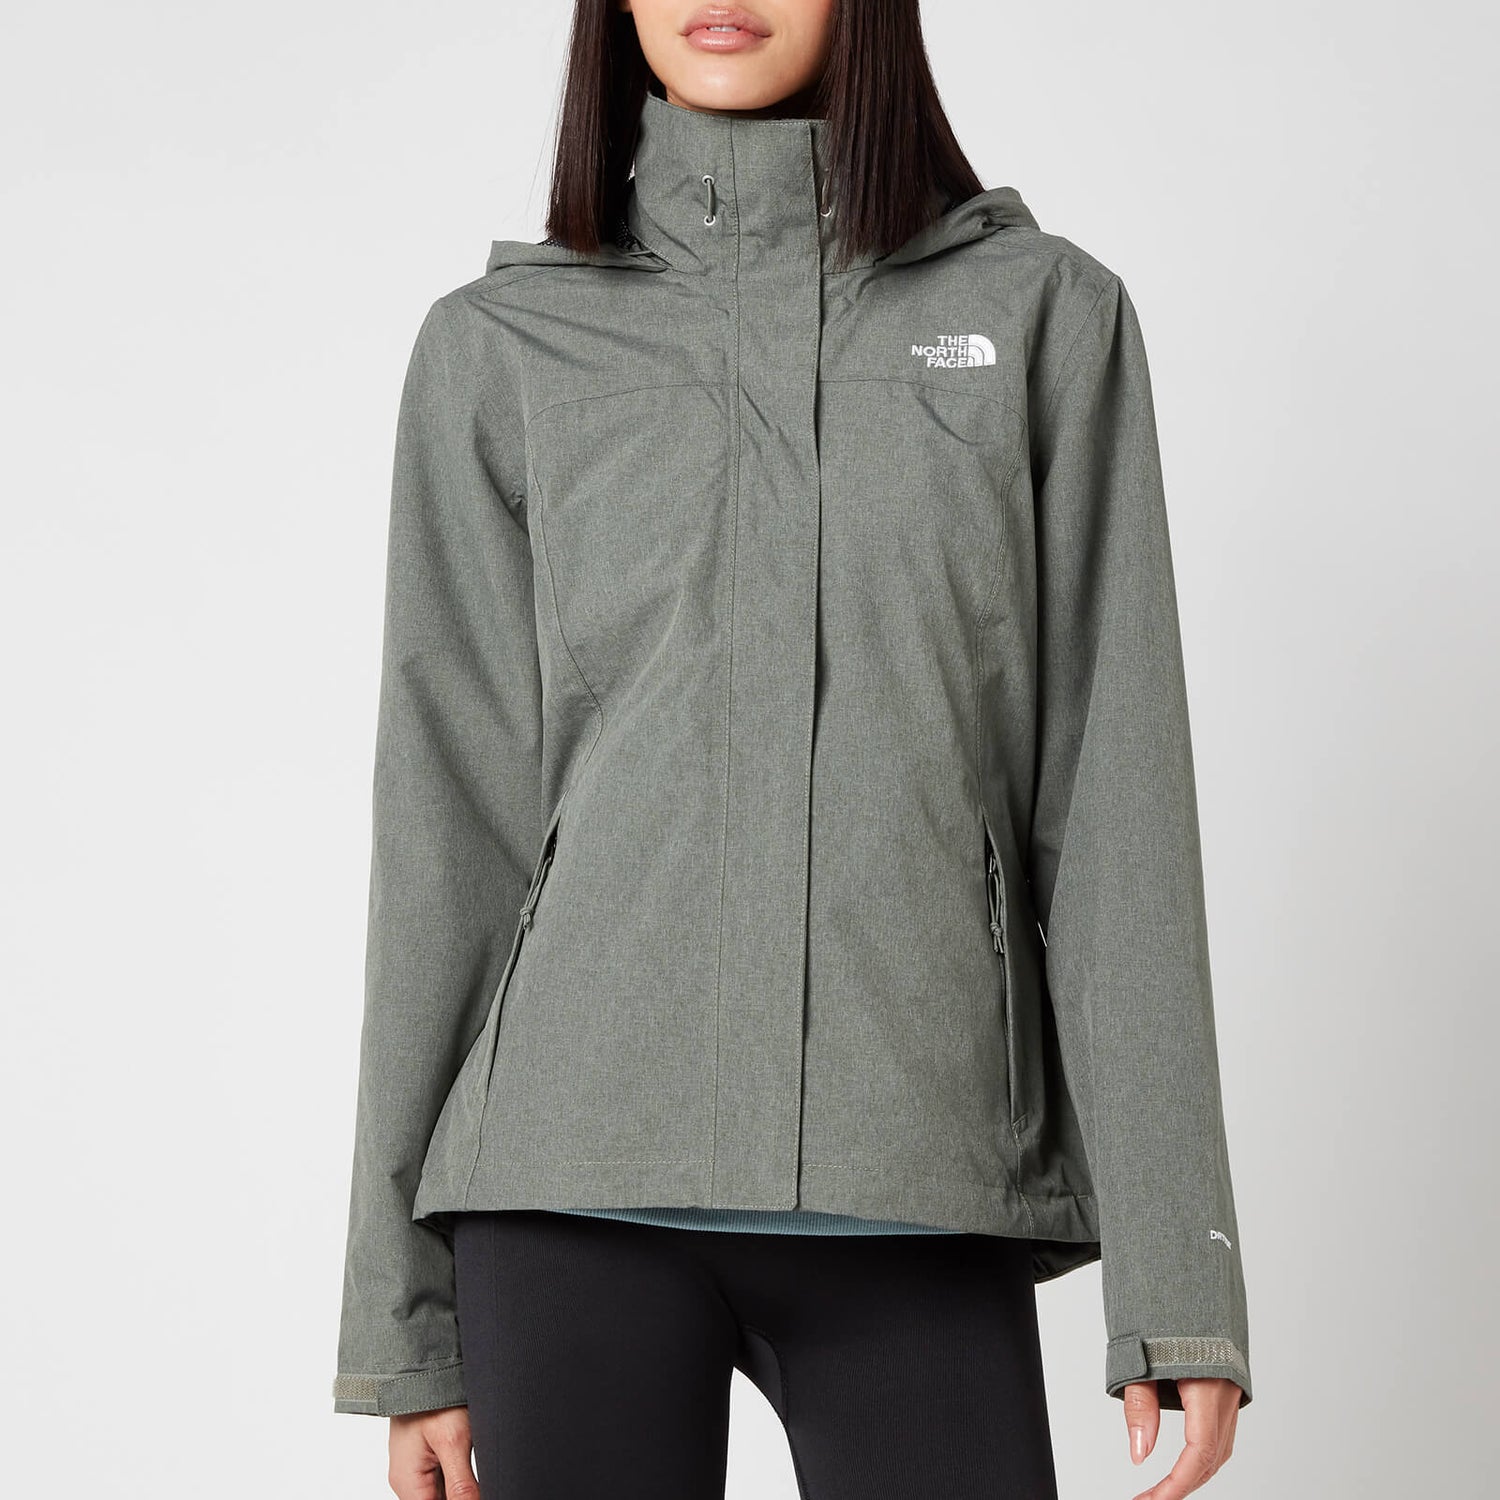 The North Face Women's Sangro Jacket - Agave Green/Dark Heather